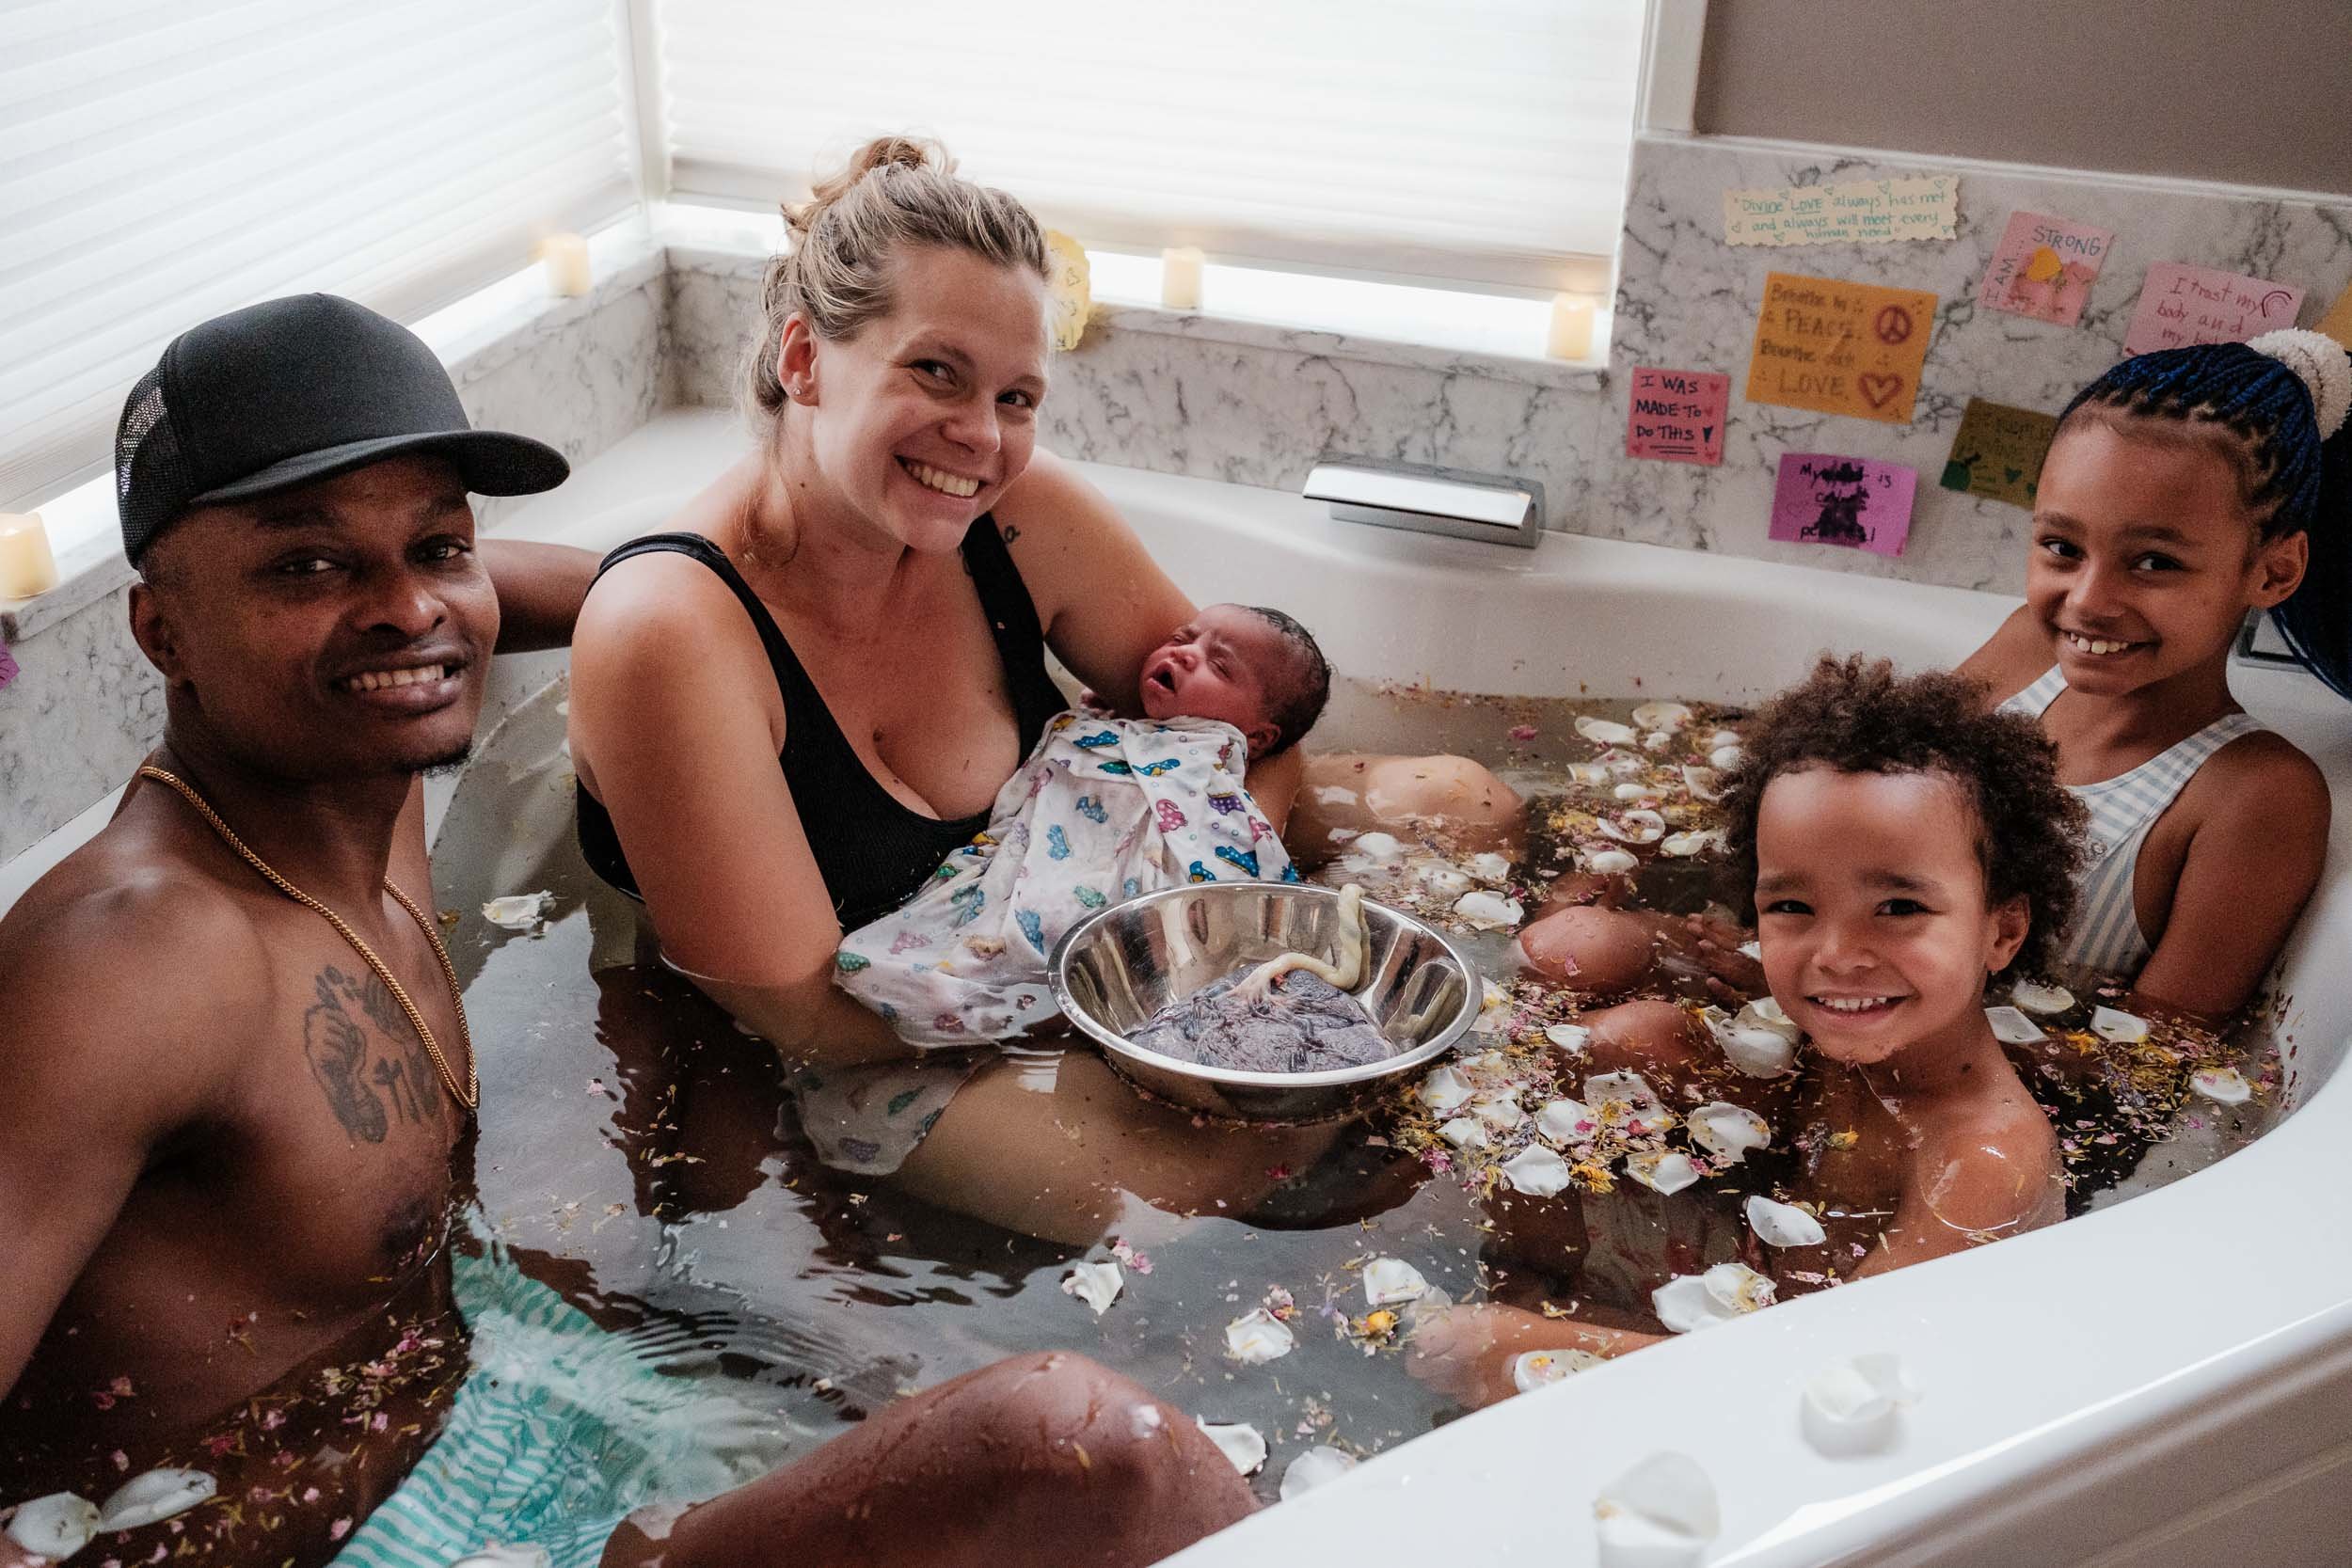 Entire family takes an herbal bath together postpartum at the Puget Sound Birth Center in Kirkland, Wa.